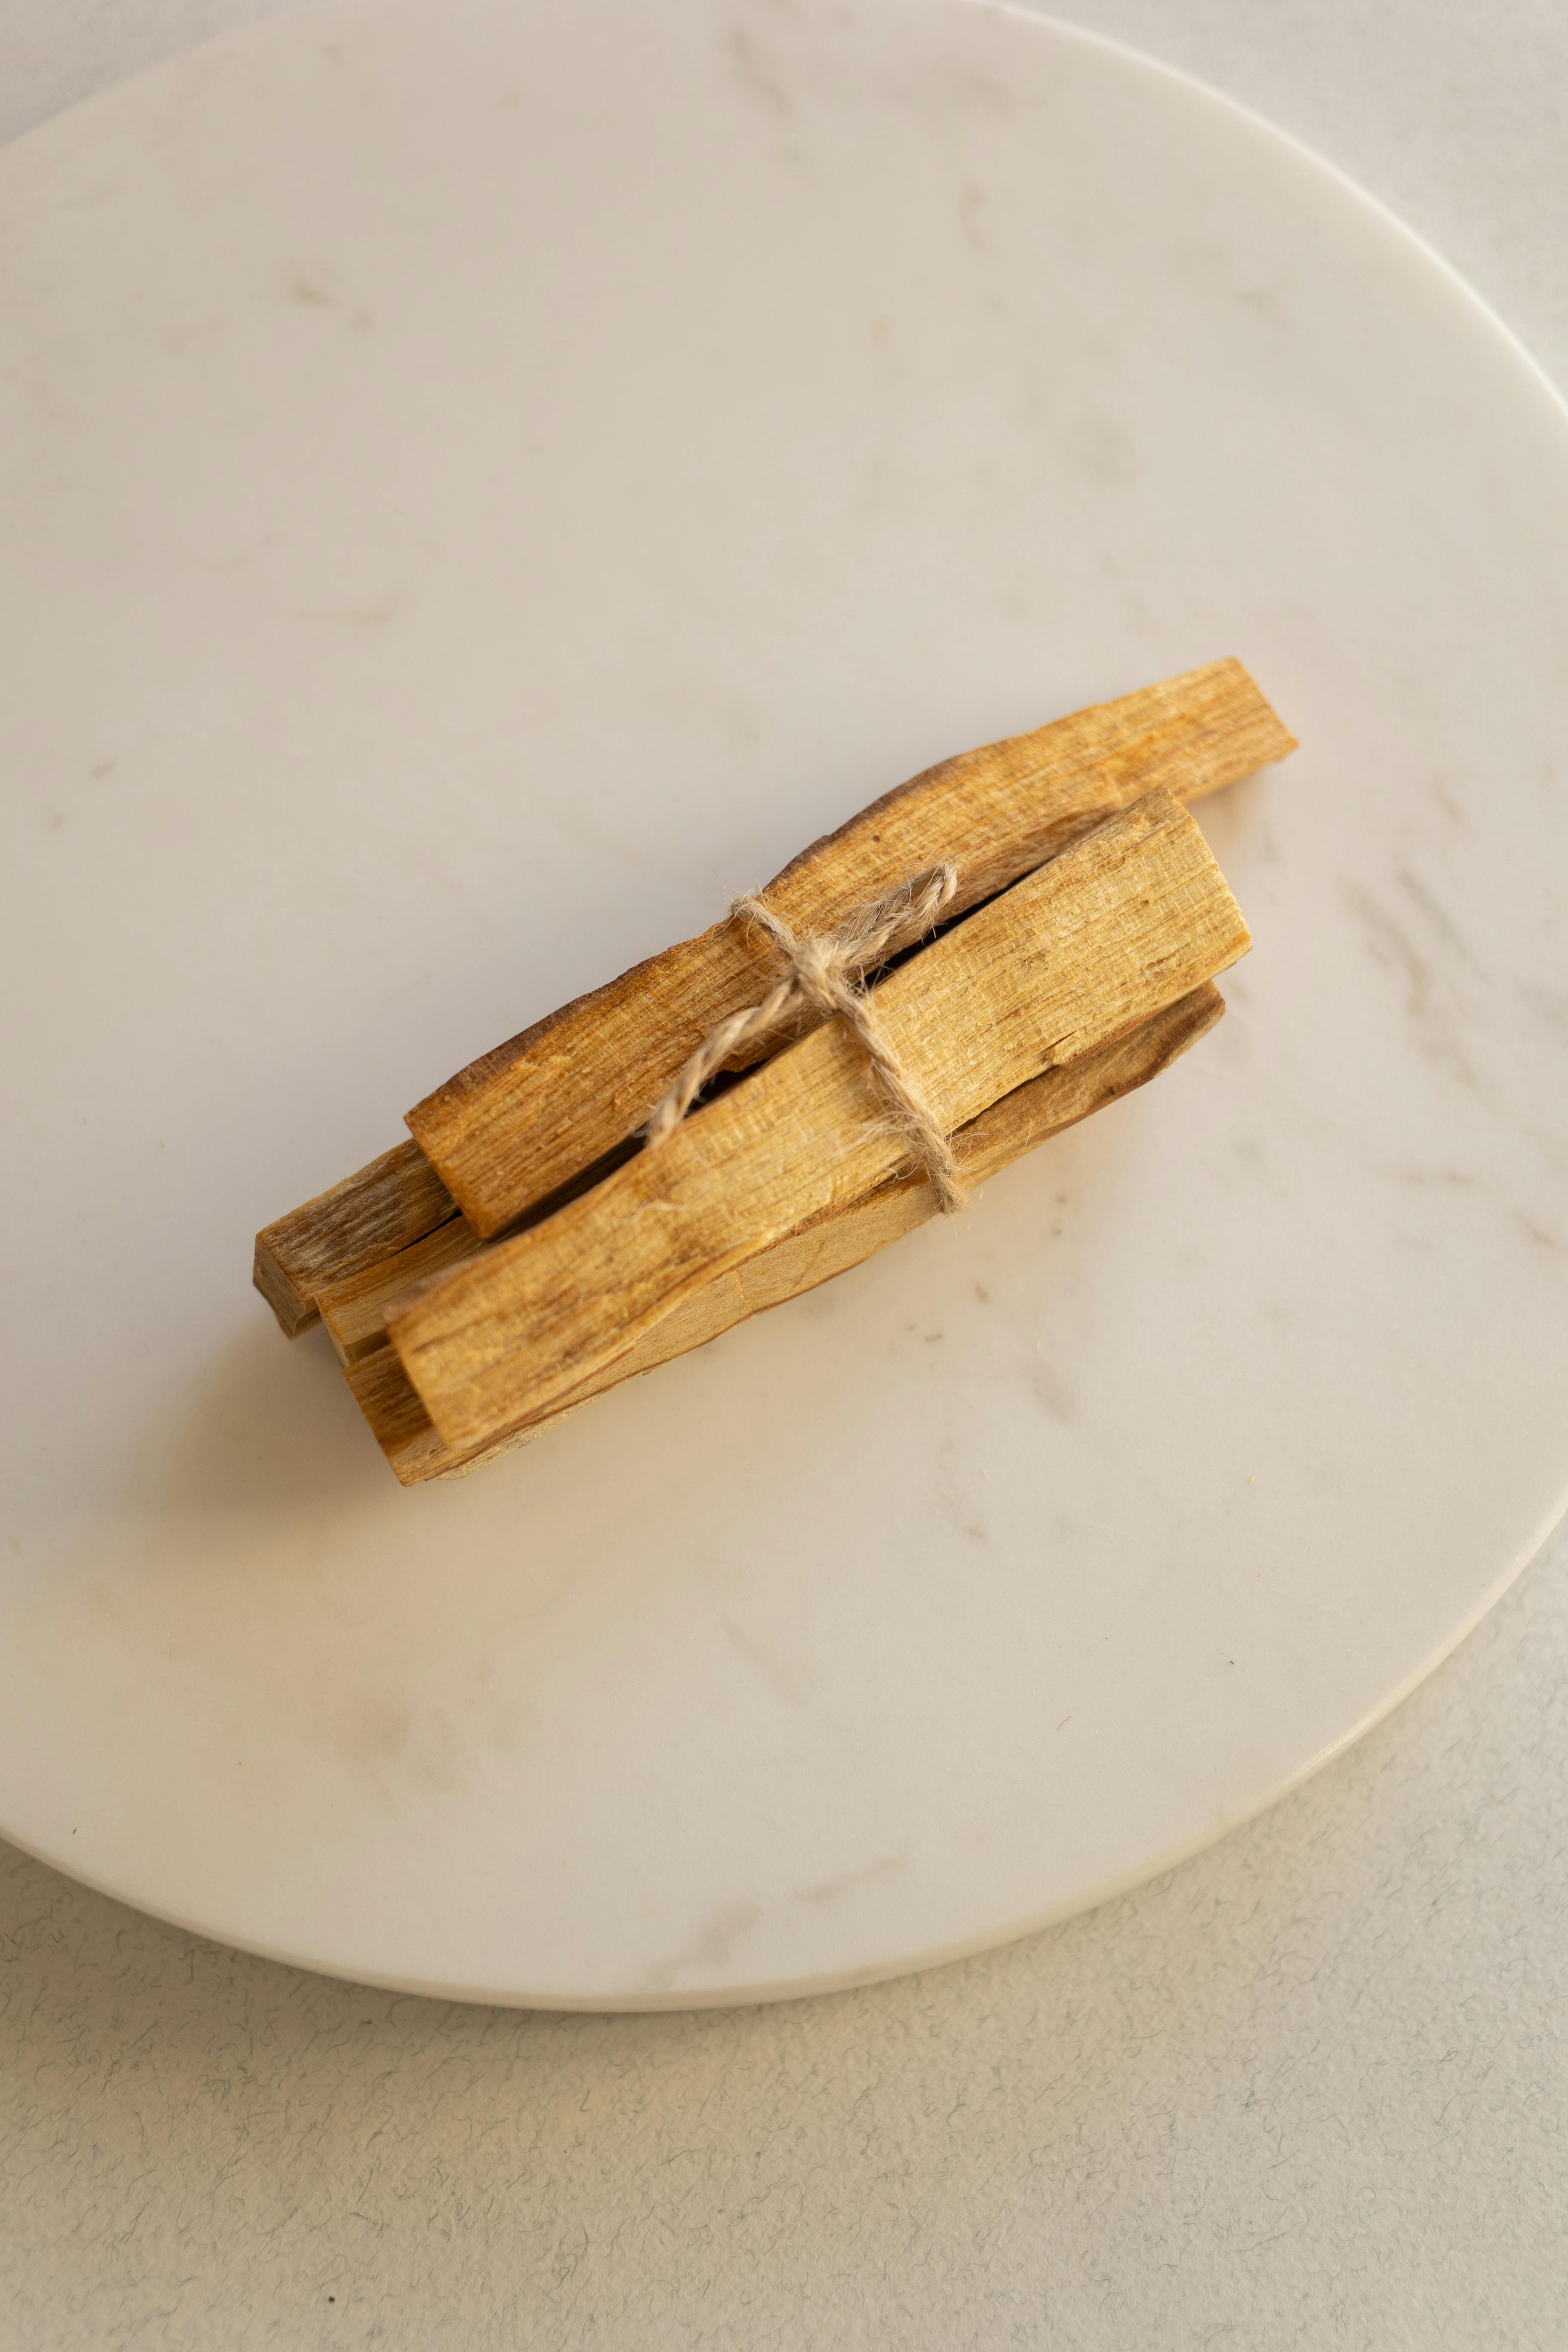 The Mystical Journey of Palo Santo Scent